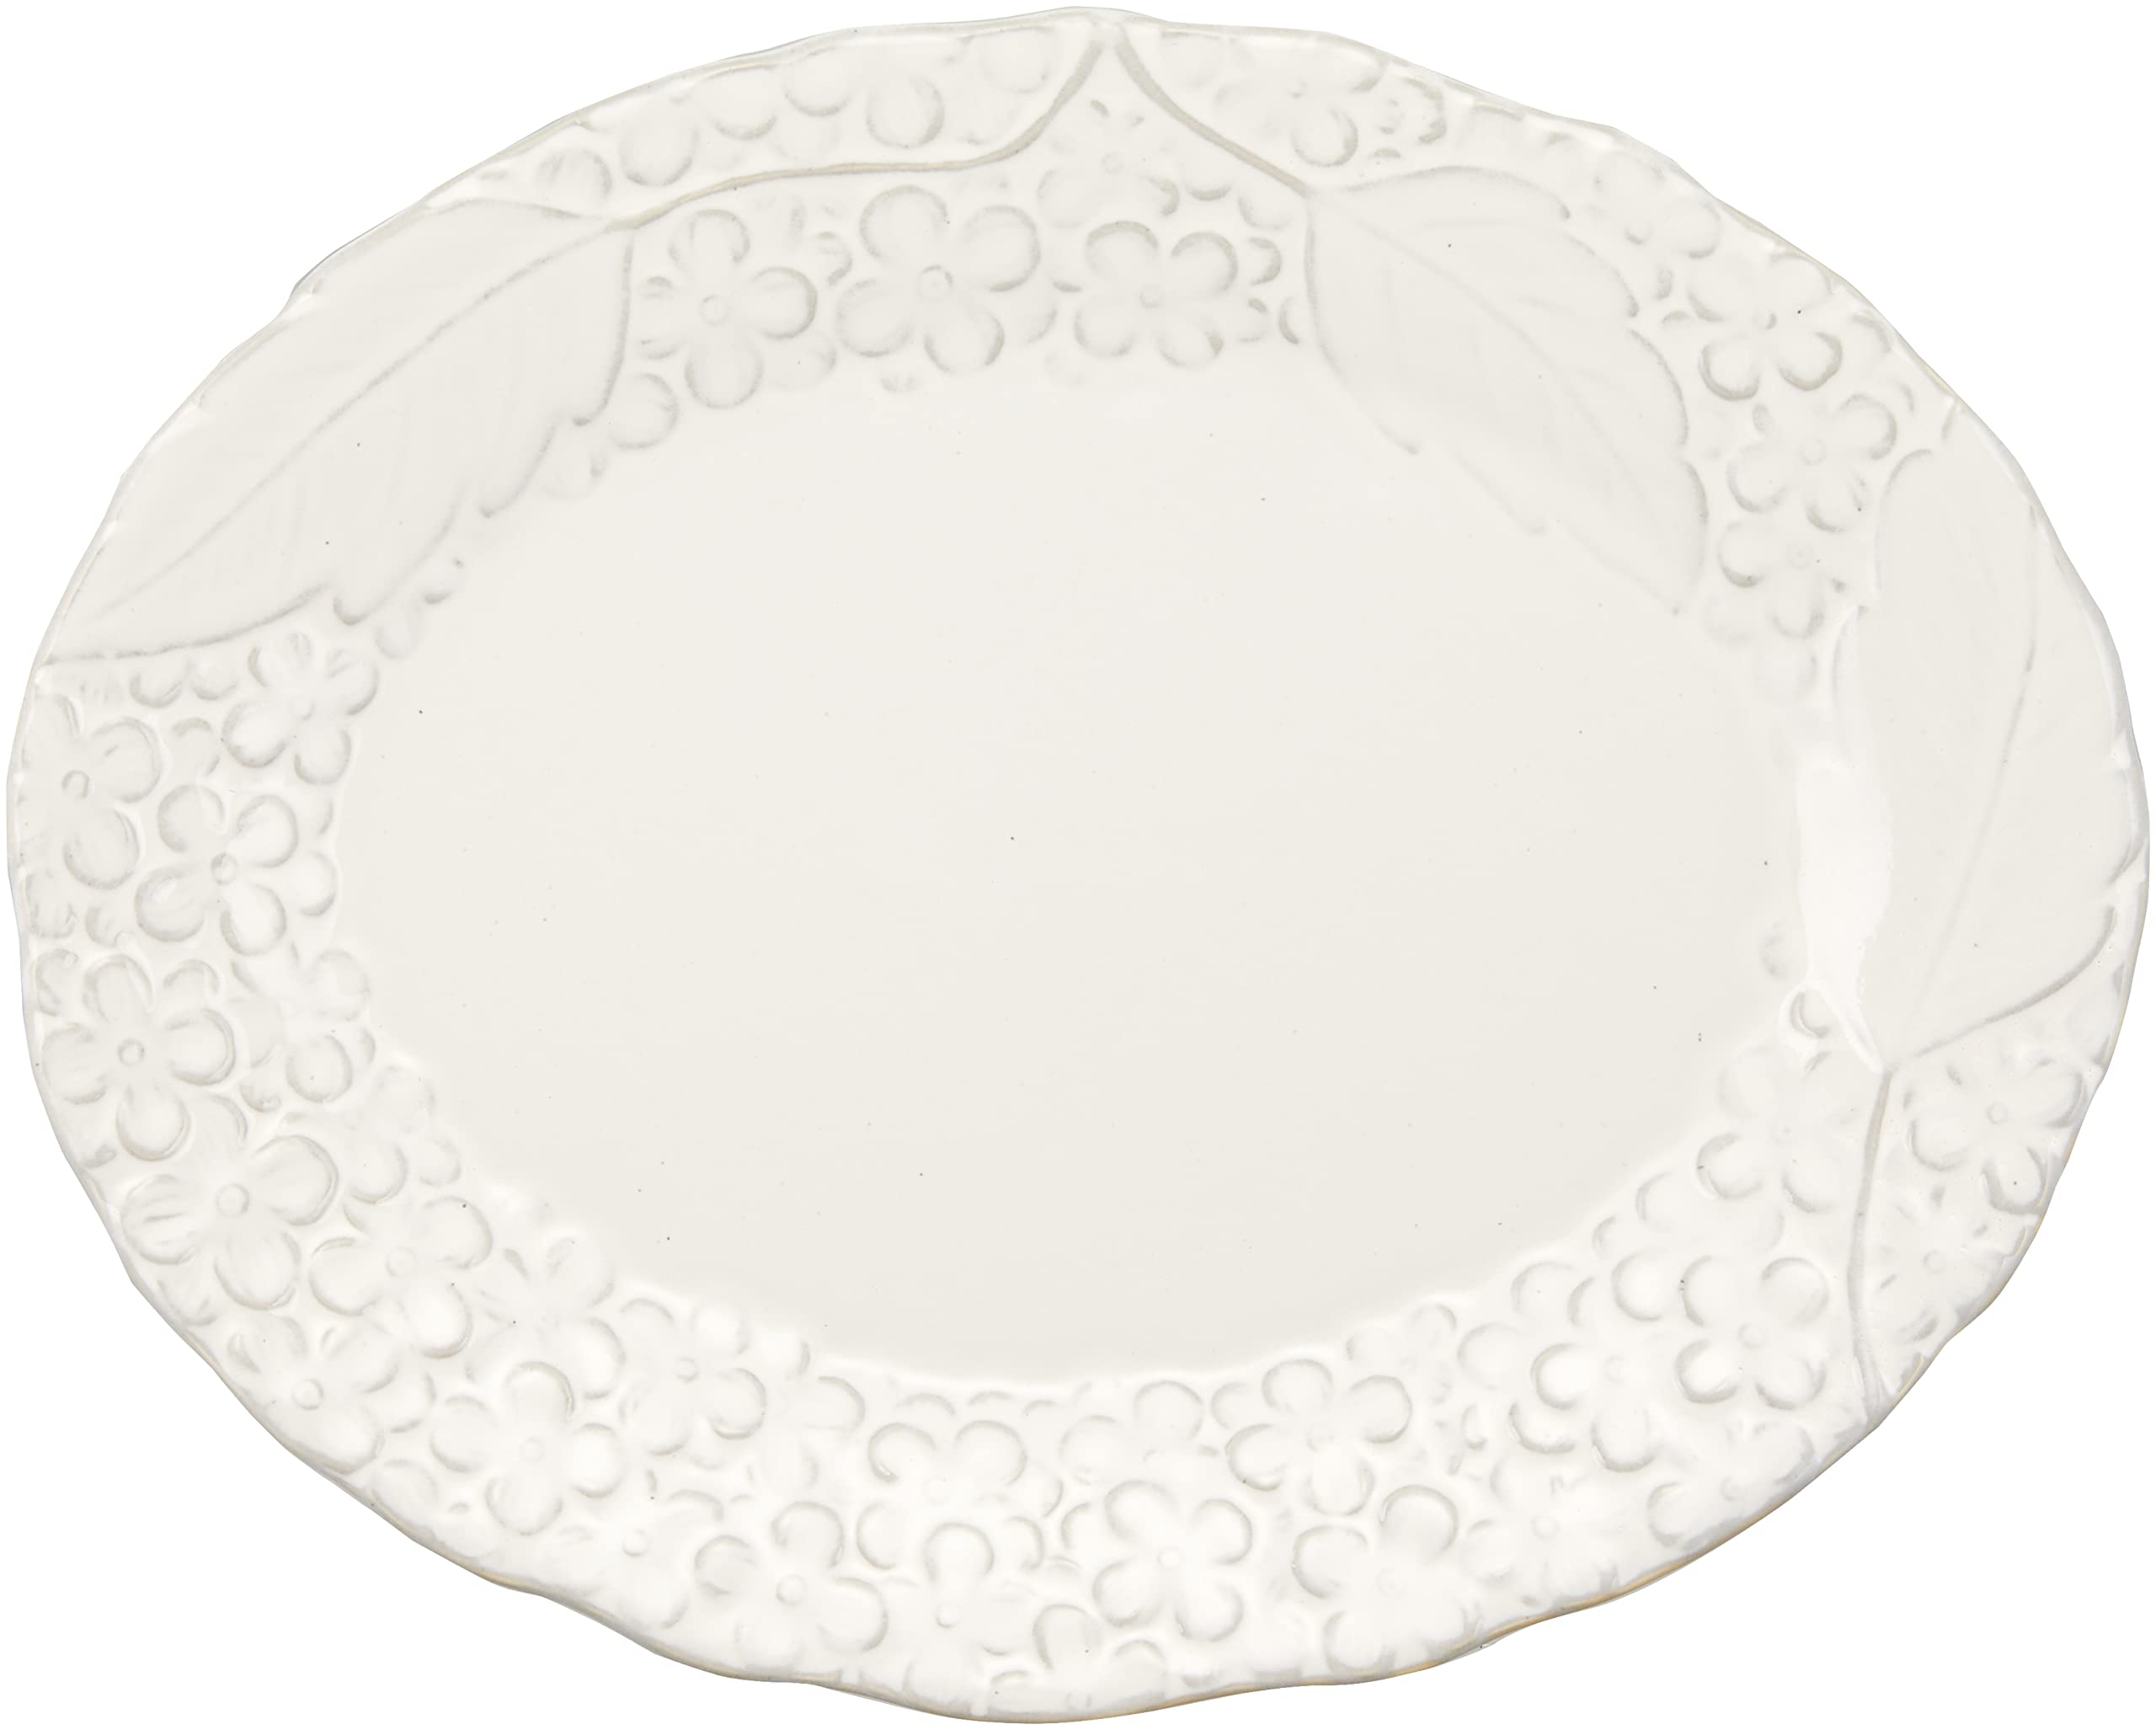 Aito Lien Oval Plate 25x20cm White Mino Ware Dishwasher/Microwave Safe Japan 267831